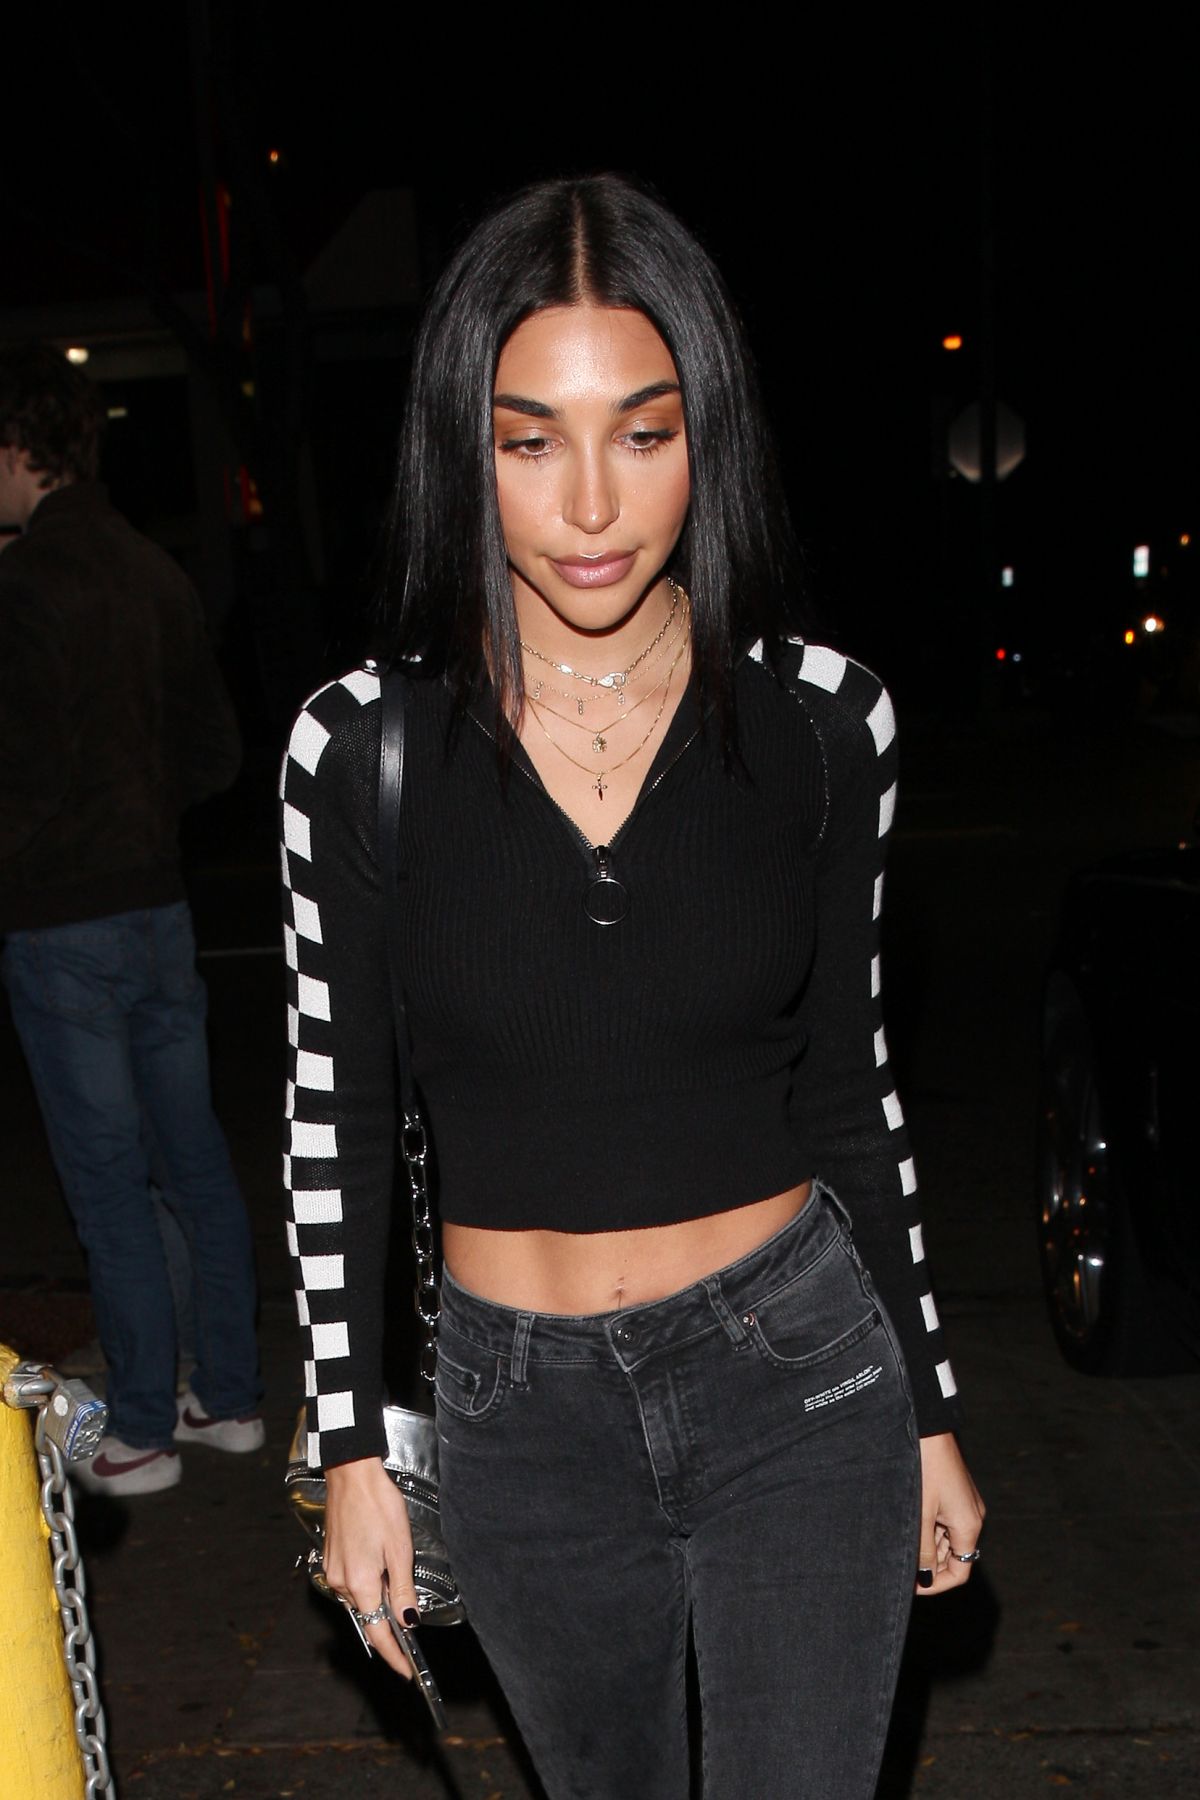 CHANTEL JEFFRIES at Delilah in West Hollywood 01/18/2019 – HawtCelebs